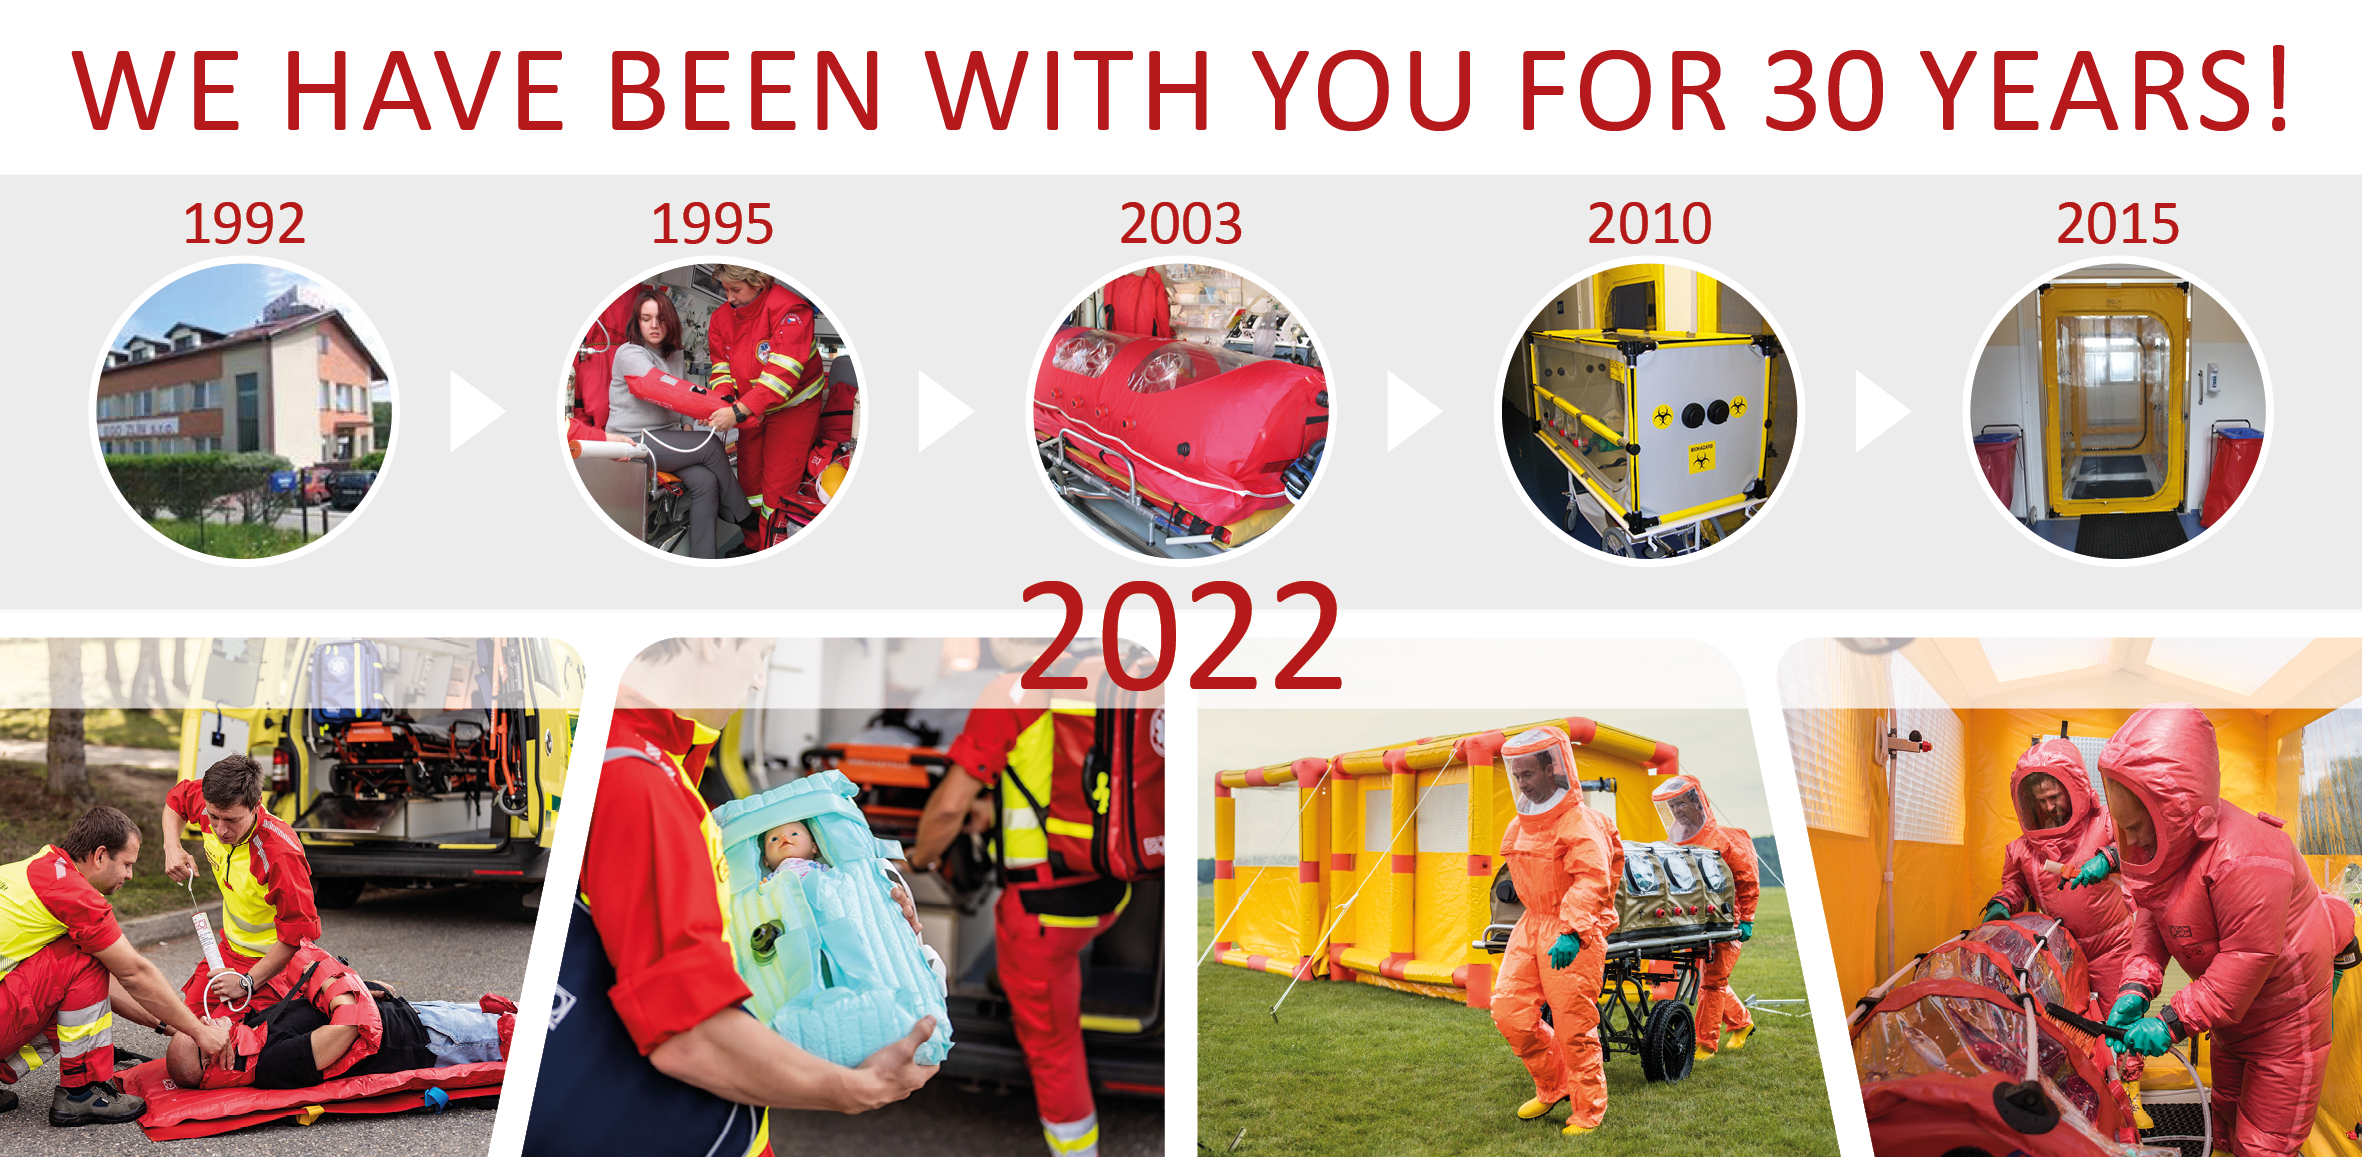 We have been with you for 30 years!